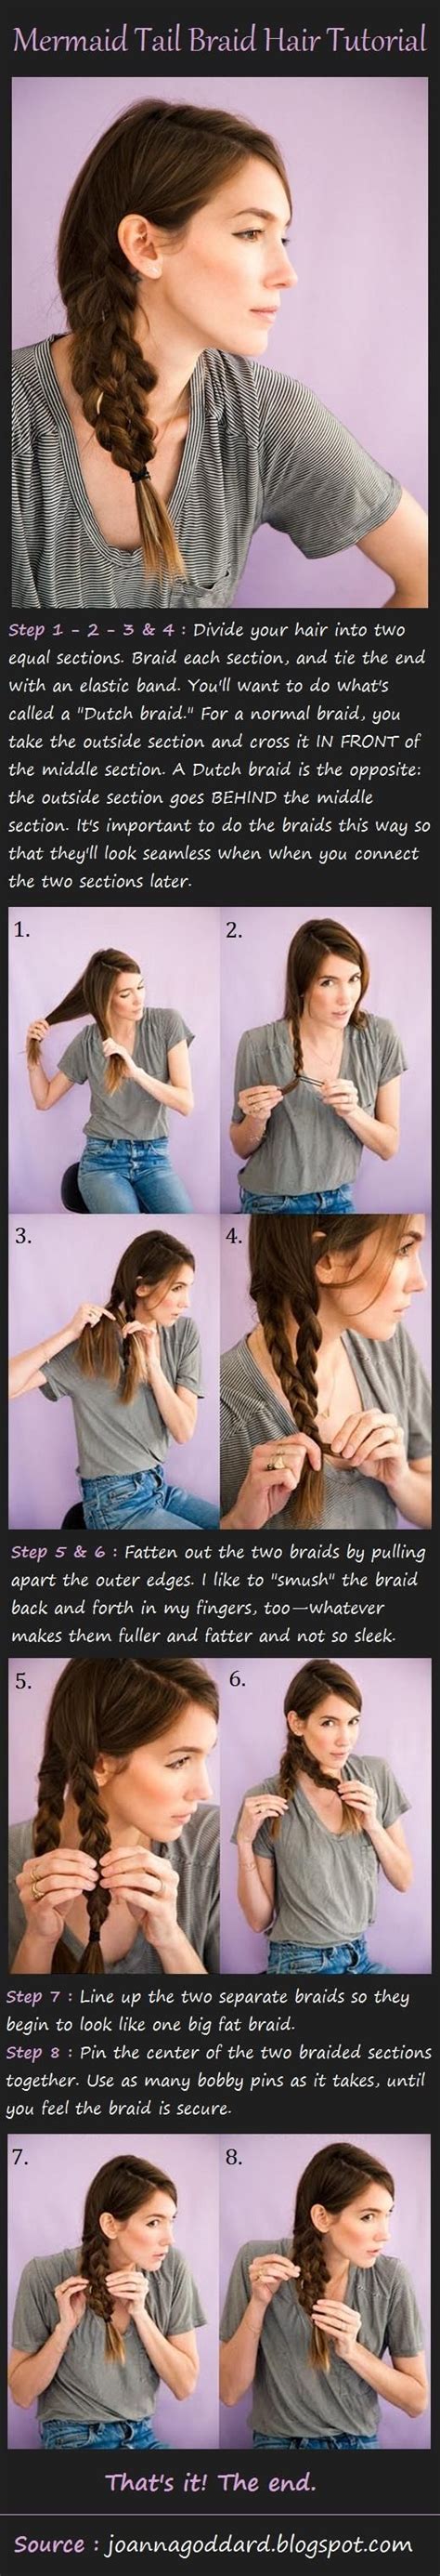 Mermaid Tail Braid Tutorial Optional Step You Can Remove The Two